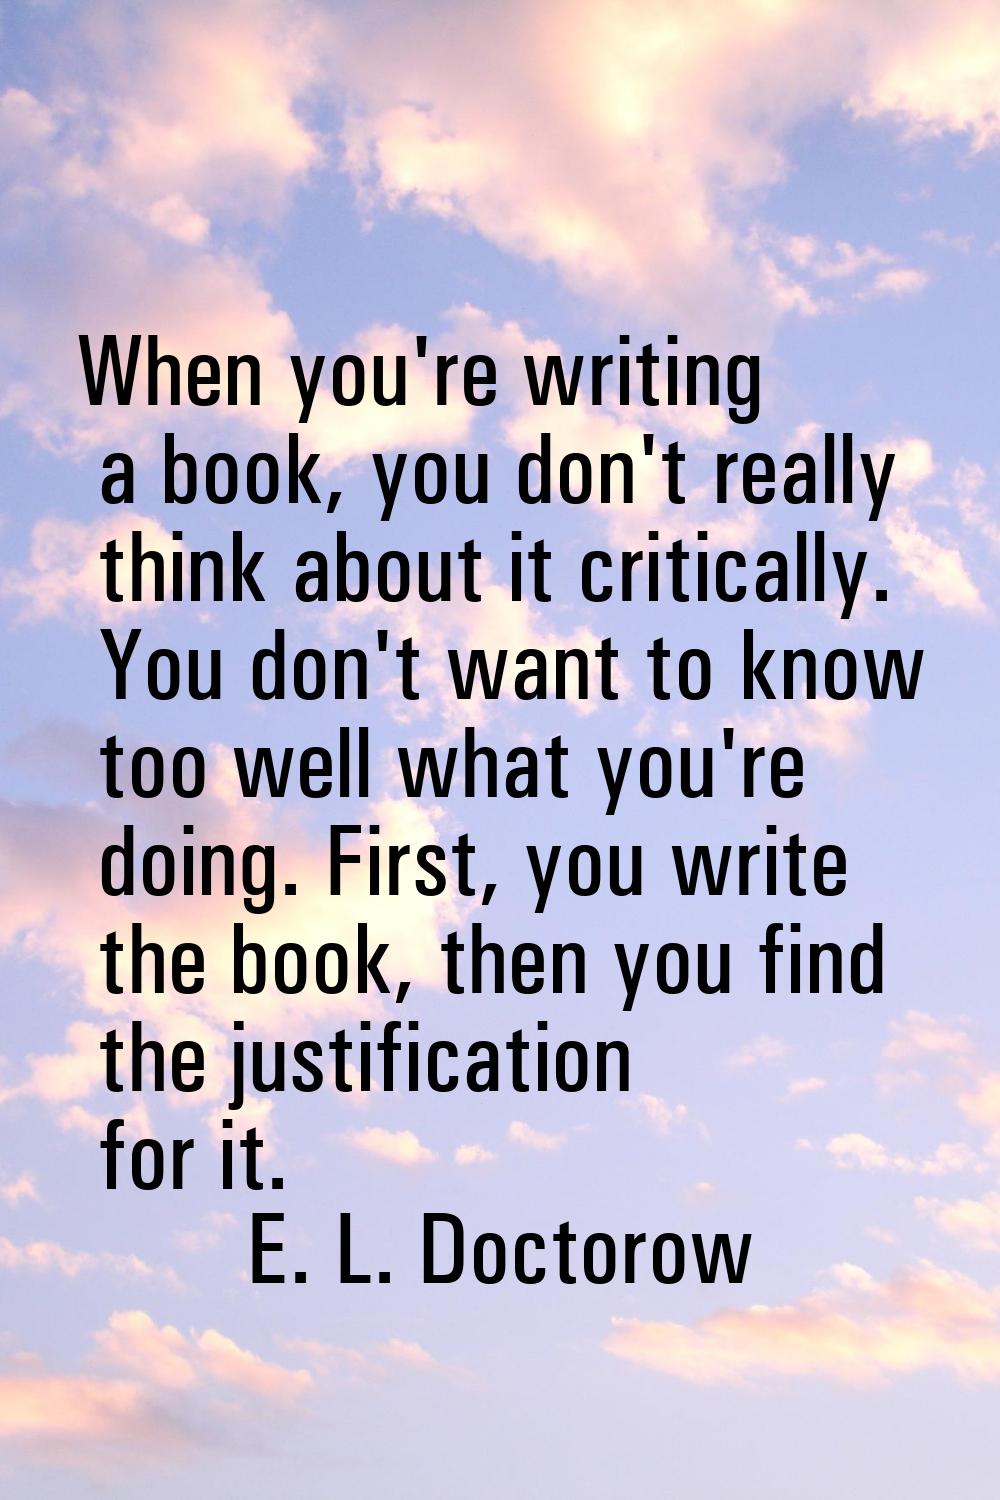 When you're writing a book, you don't really think about it critically. You don't want to know too 